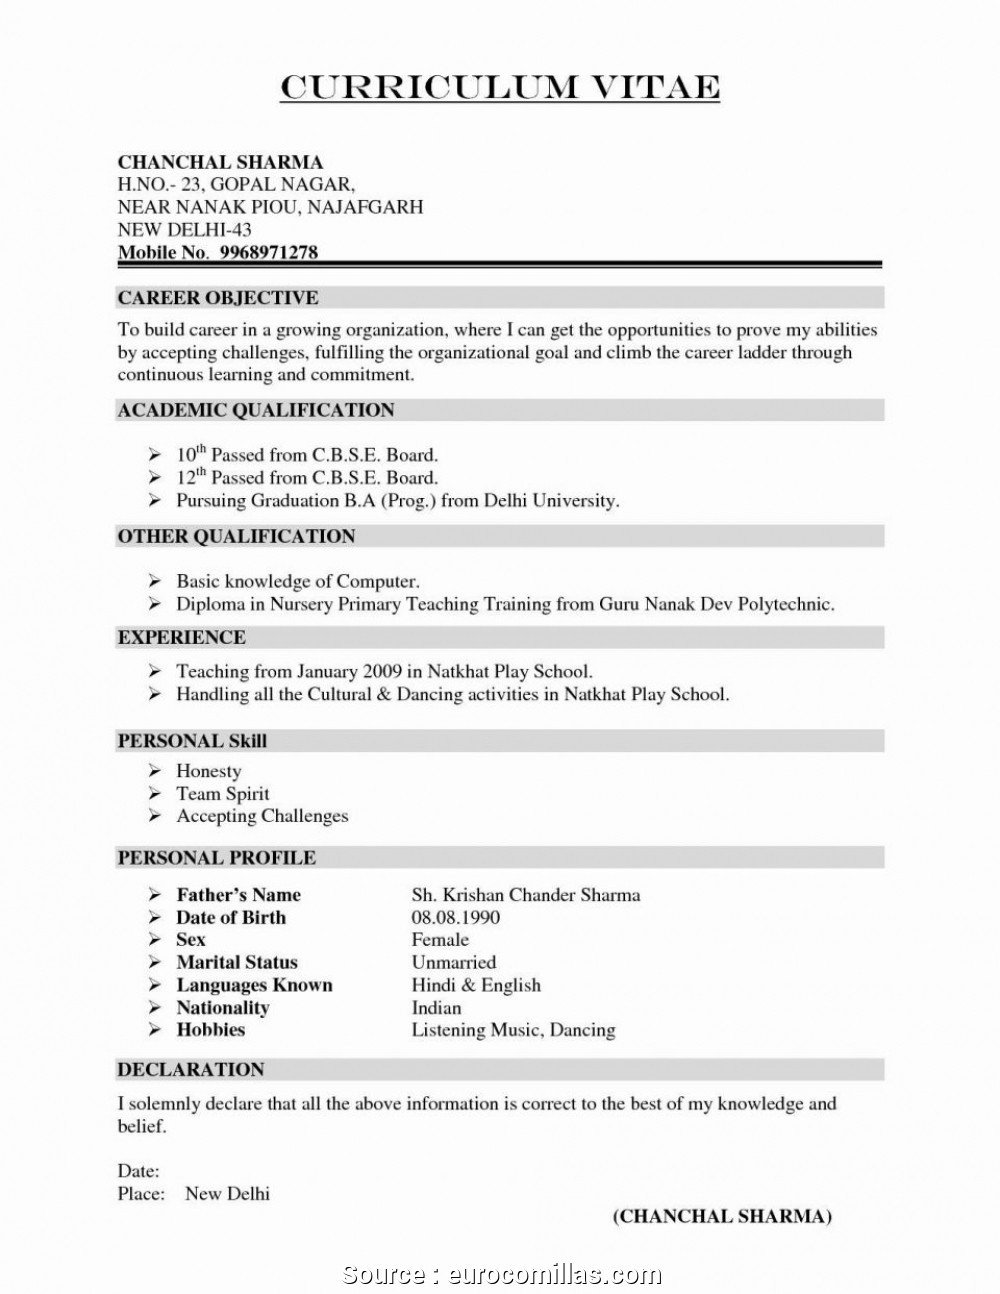 6 Nice Basic Lesson Plan Template Secondary